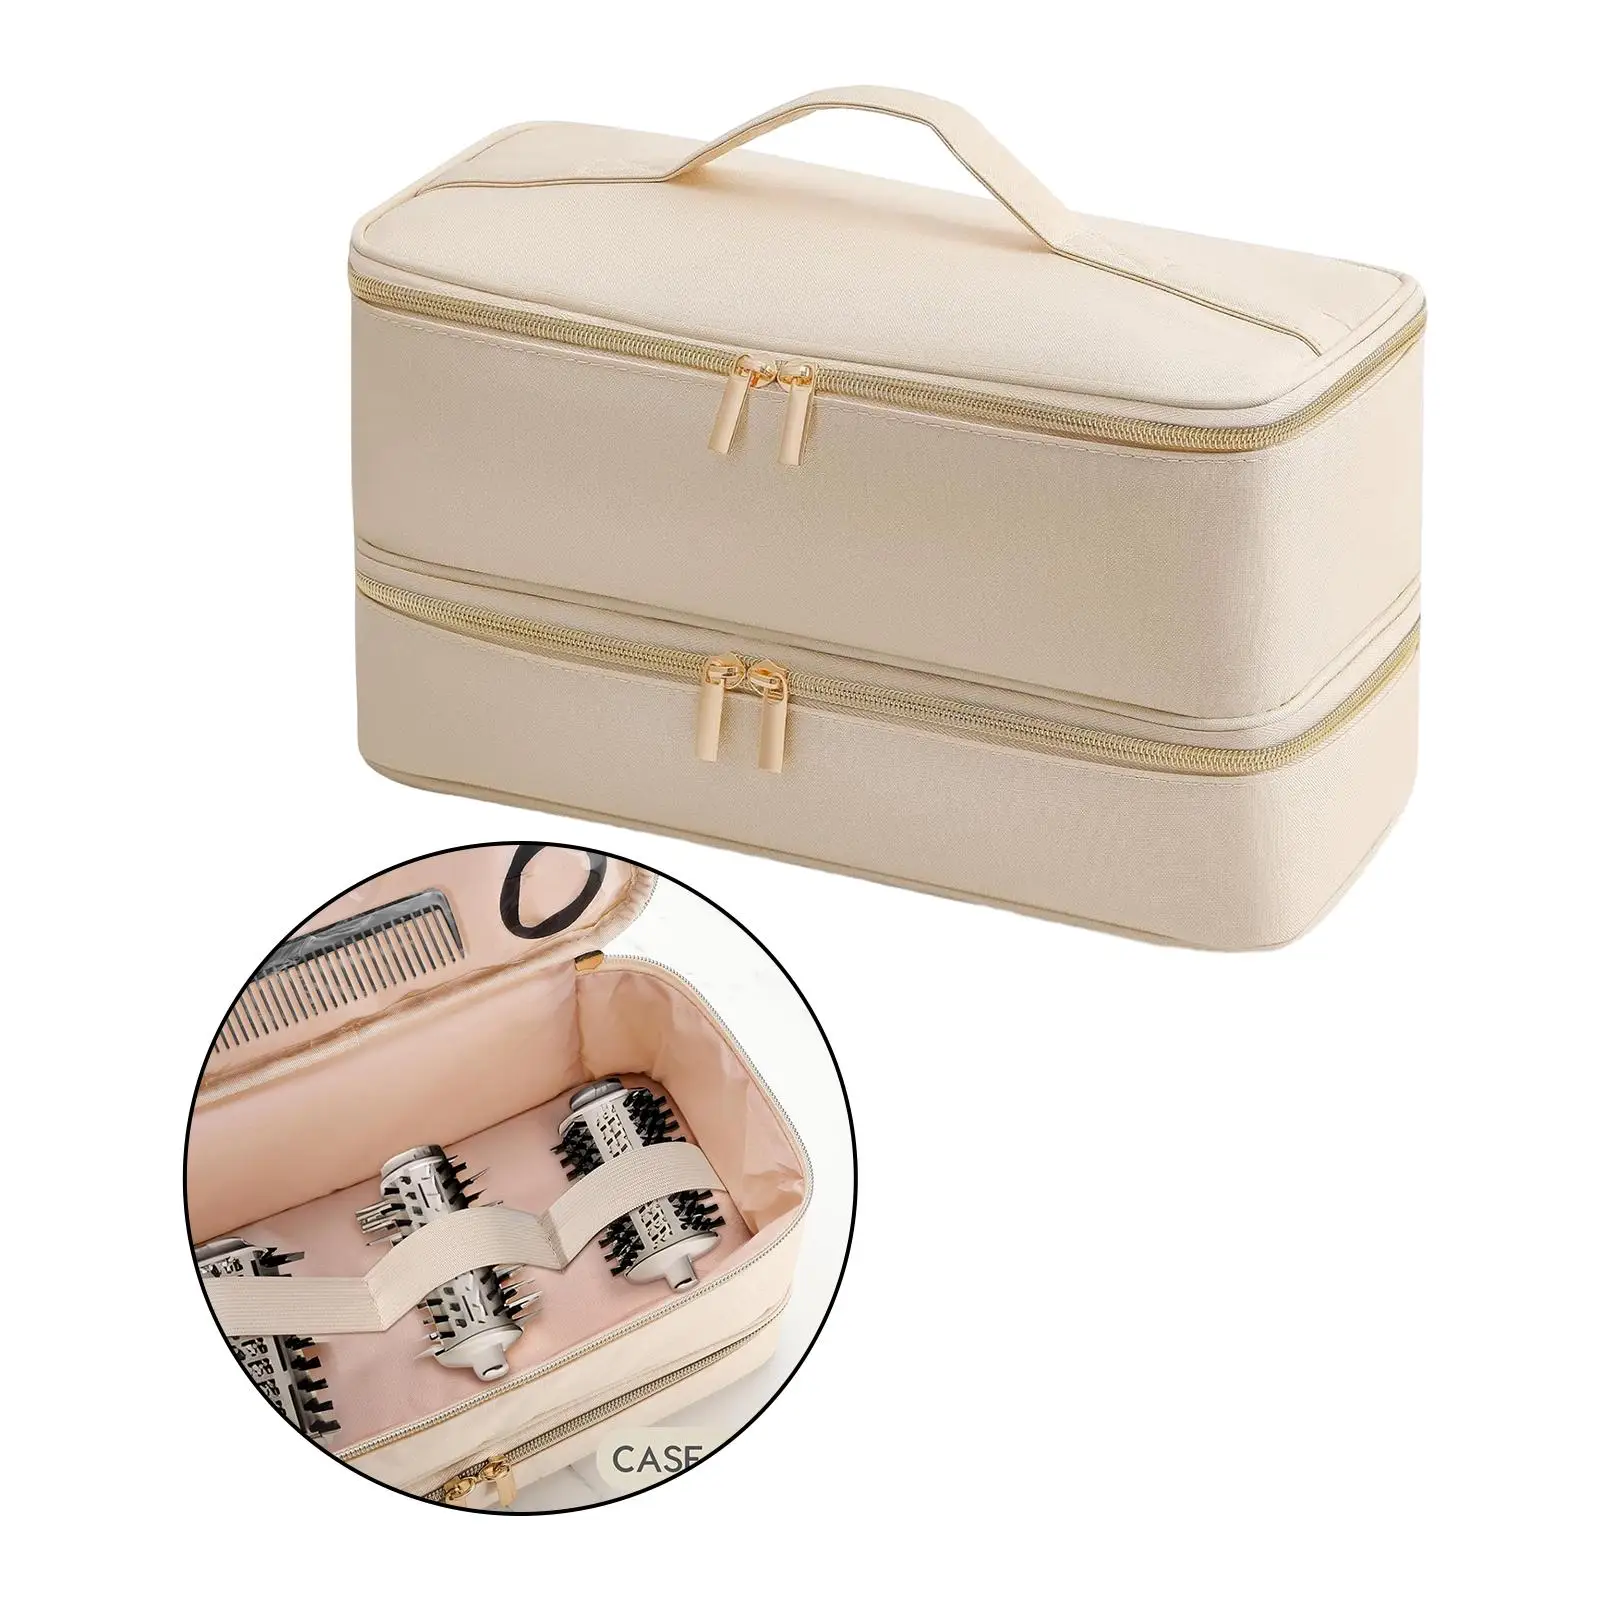 Double Layer Travel Carrying Case Double Layer Carrying Case for Attachment Styler Hair Curler Accessories Hair Dryer Brush